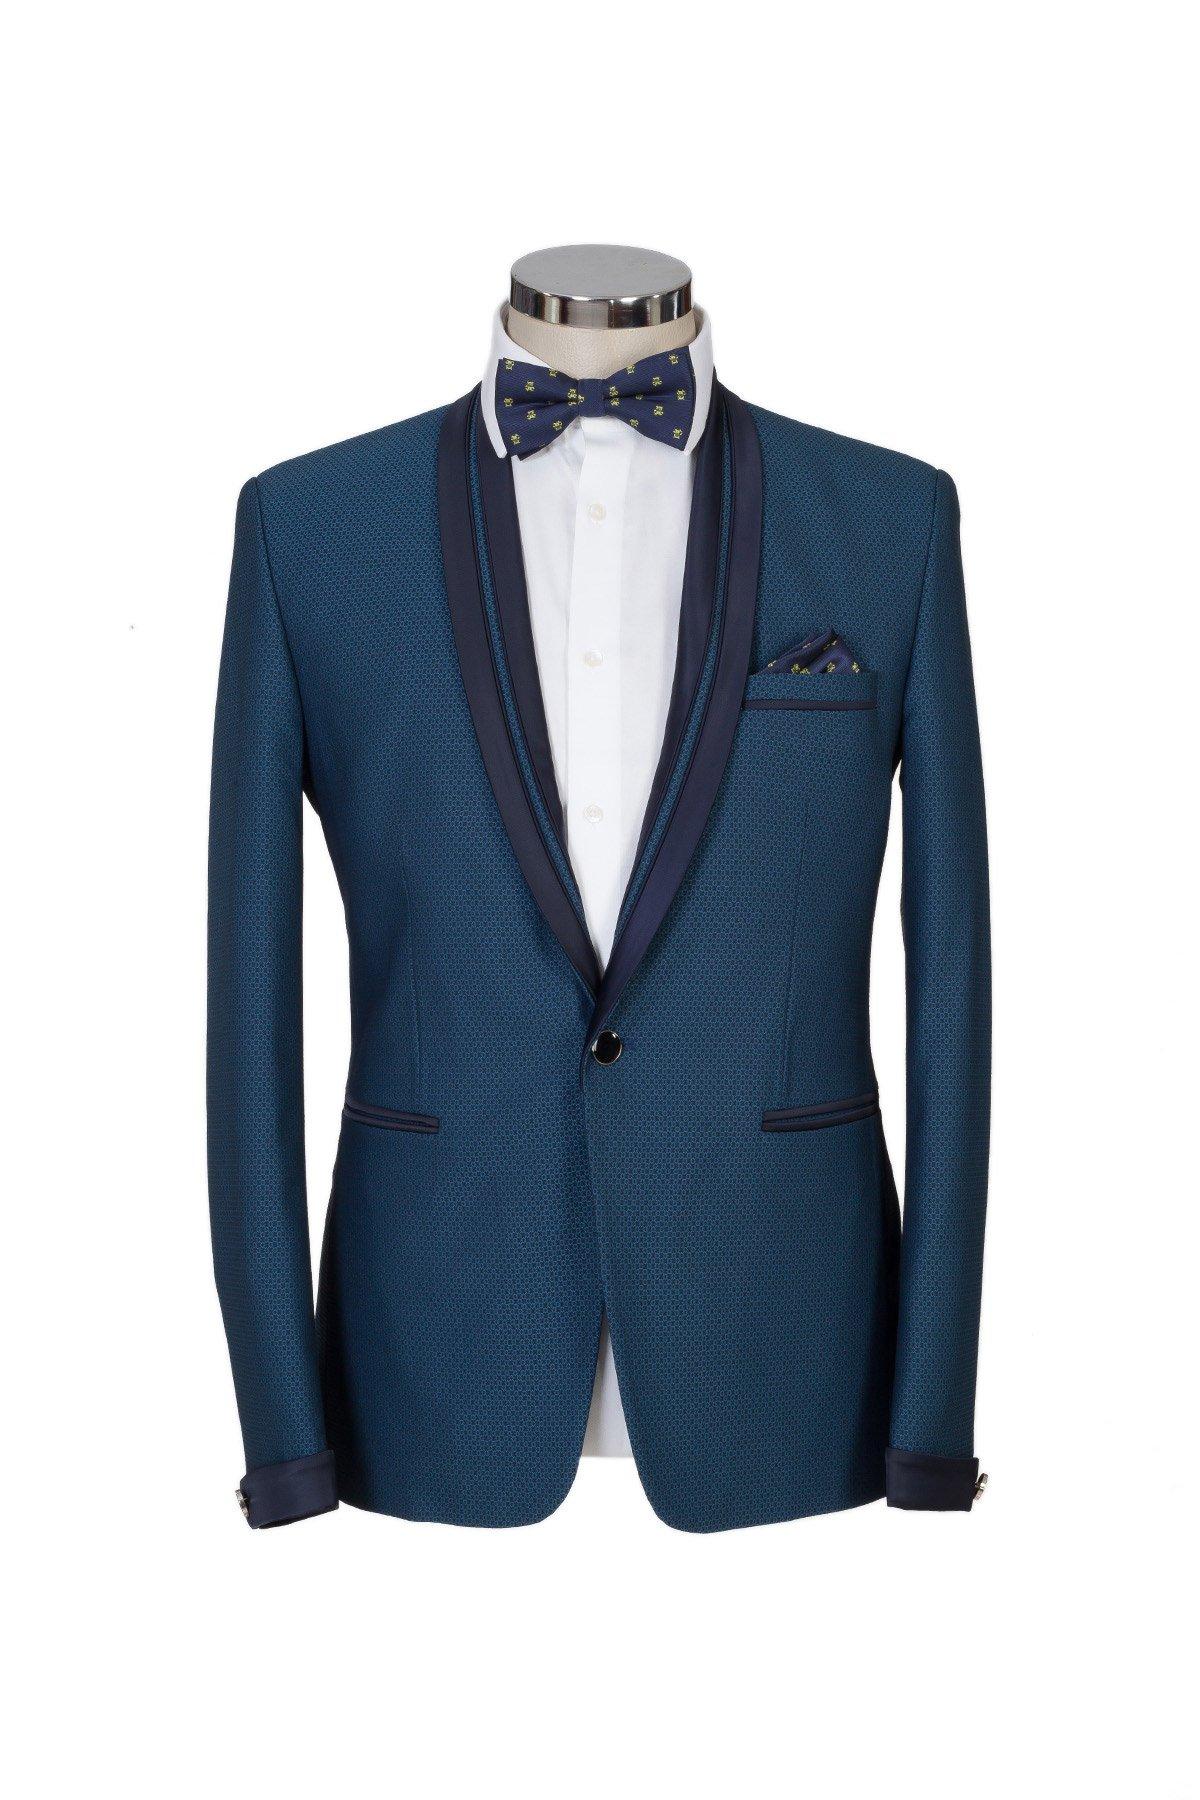 Blue Colored Textured Finish Ceremony Suit